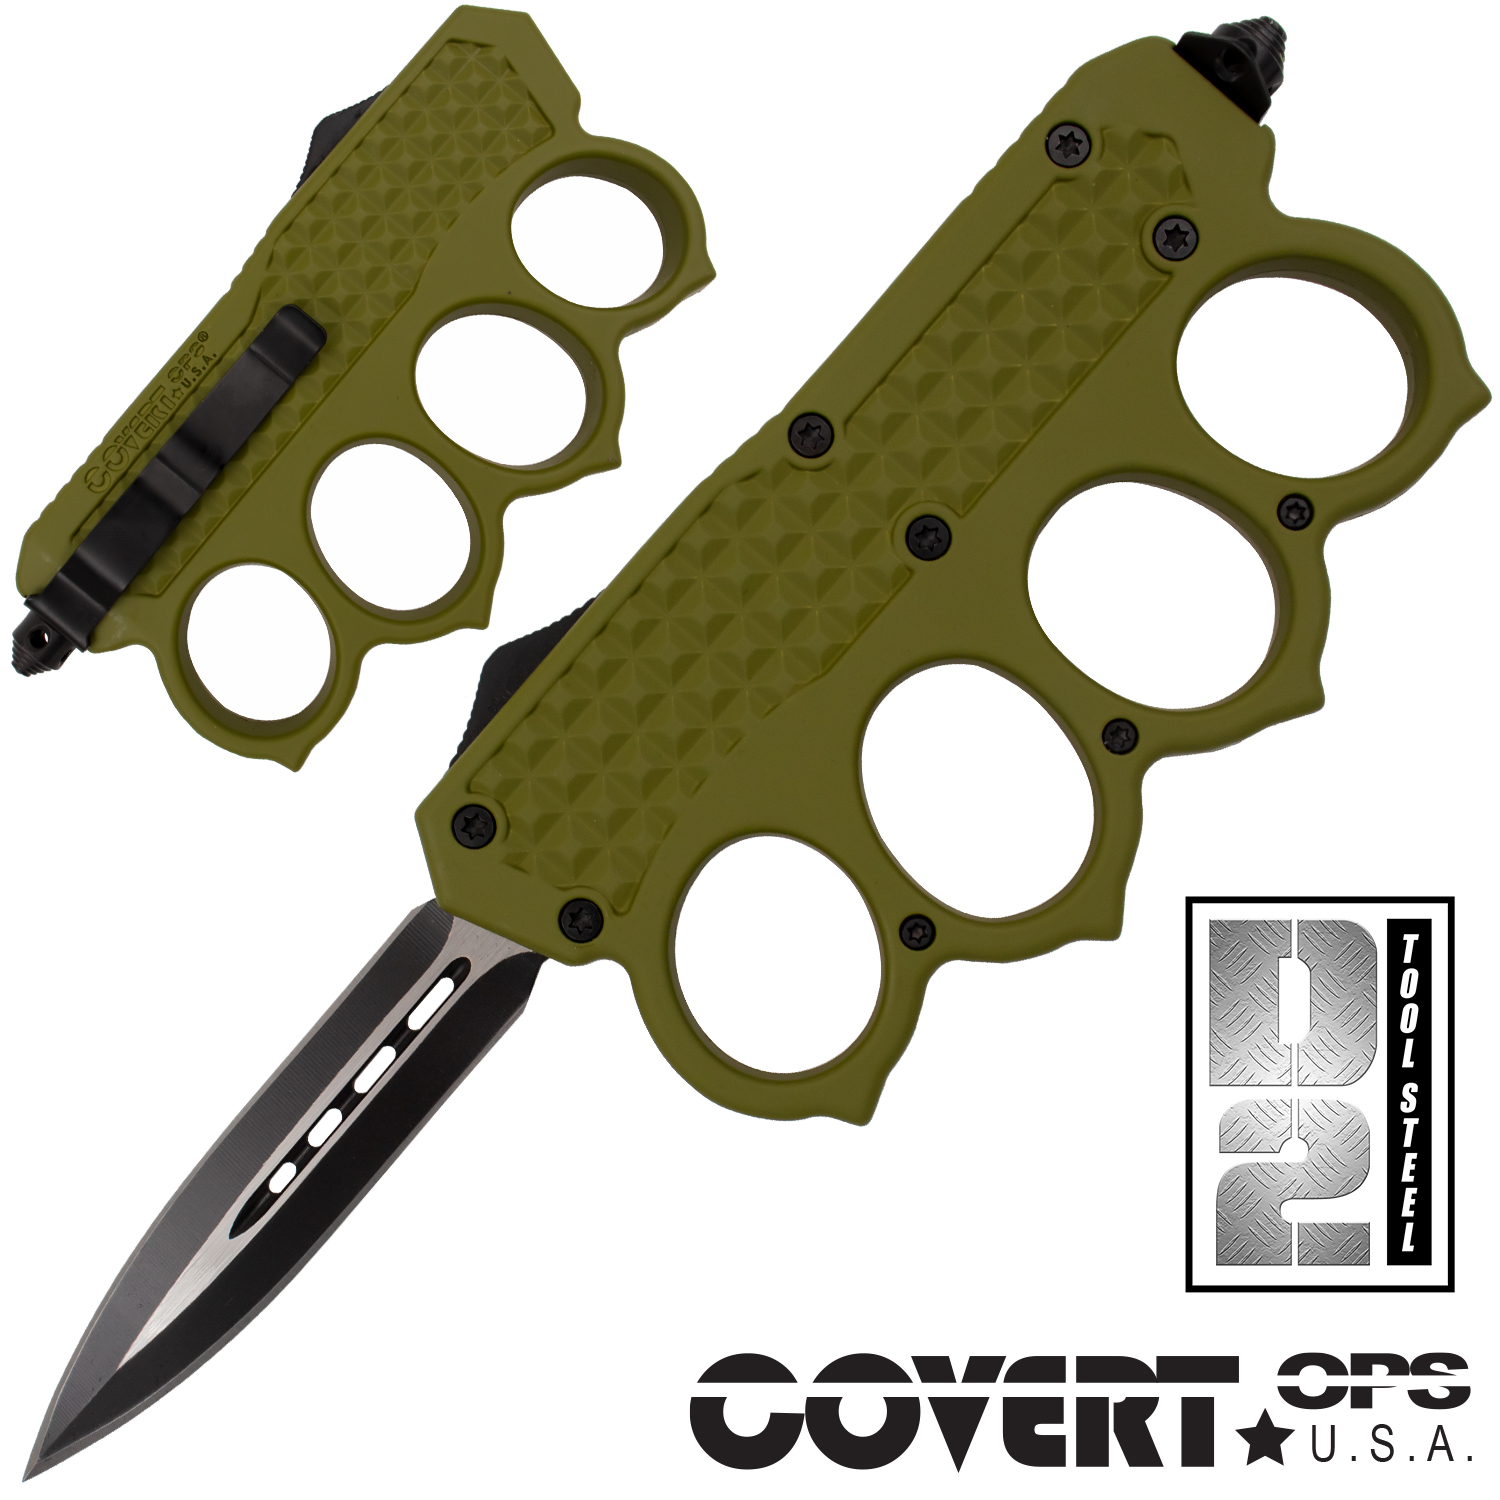 TA12 Automatic OTF Knuckle Knife with Tool and Carrying Case DEdge (Green)